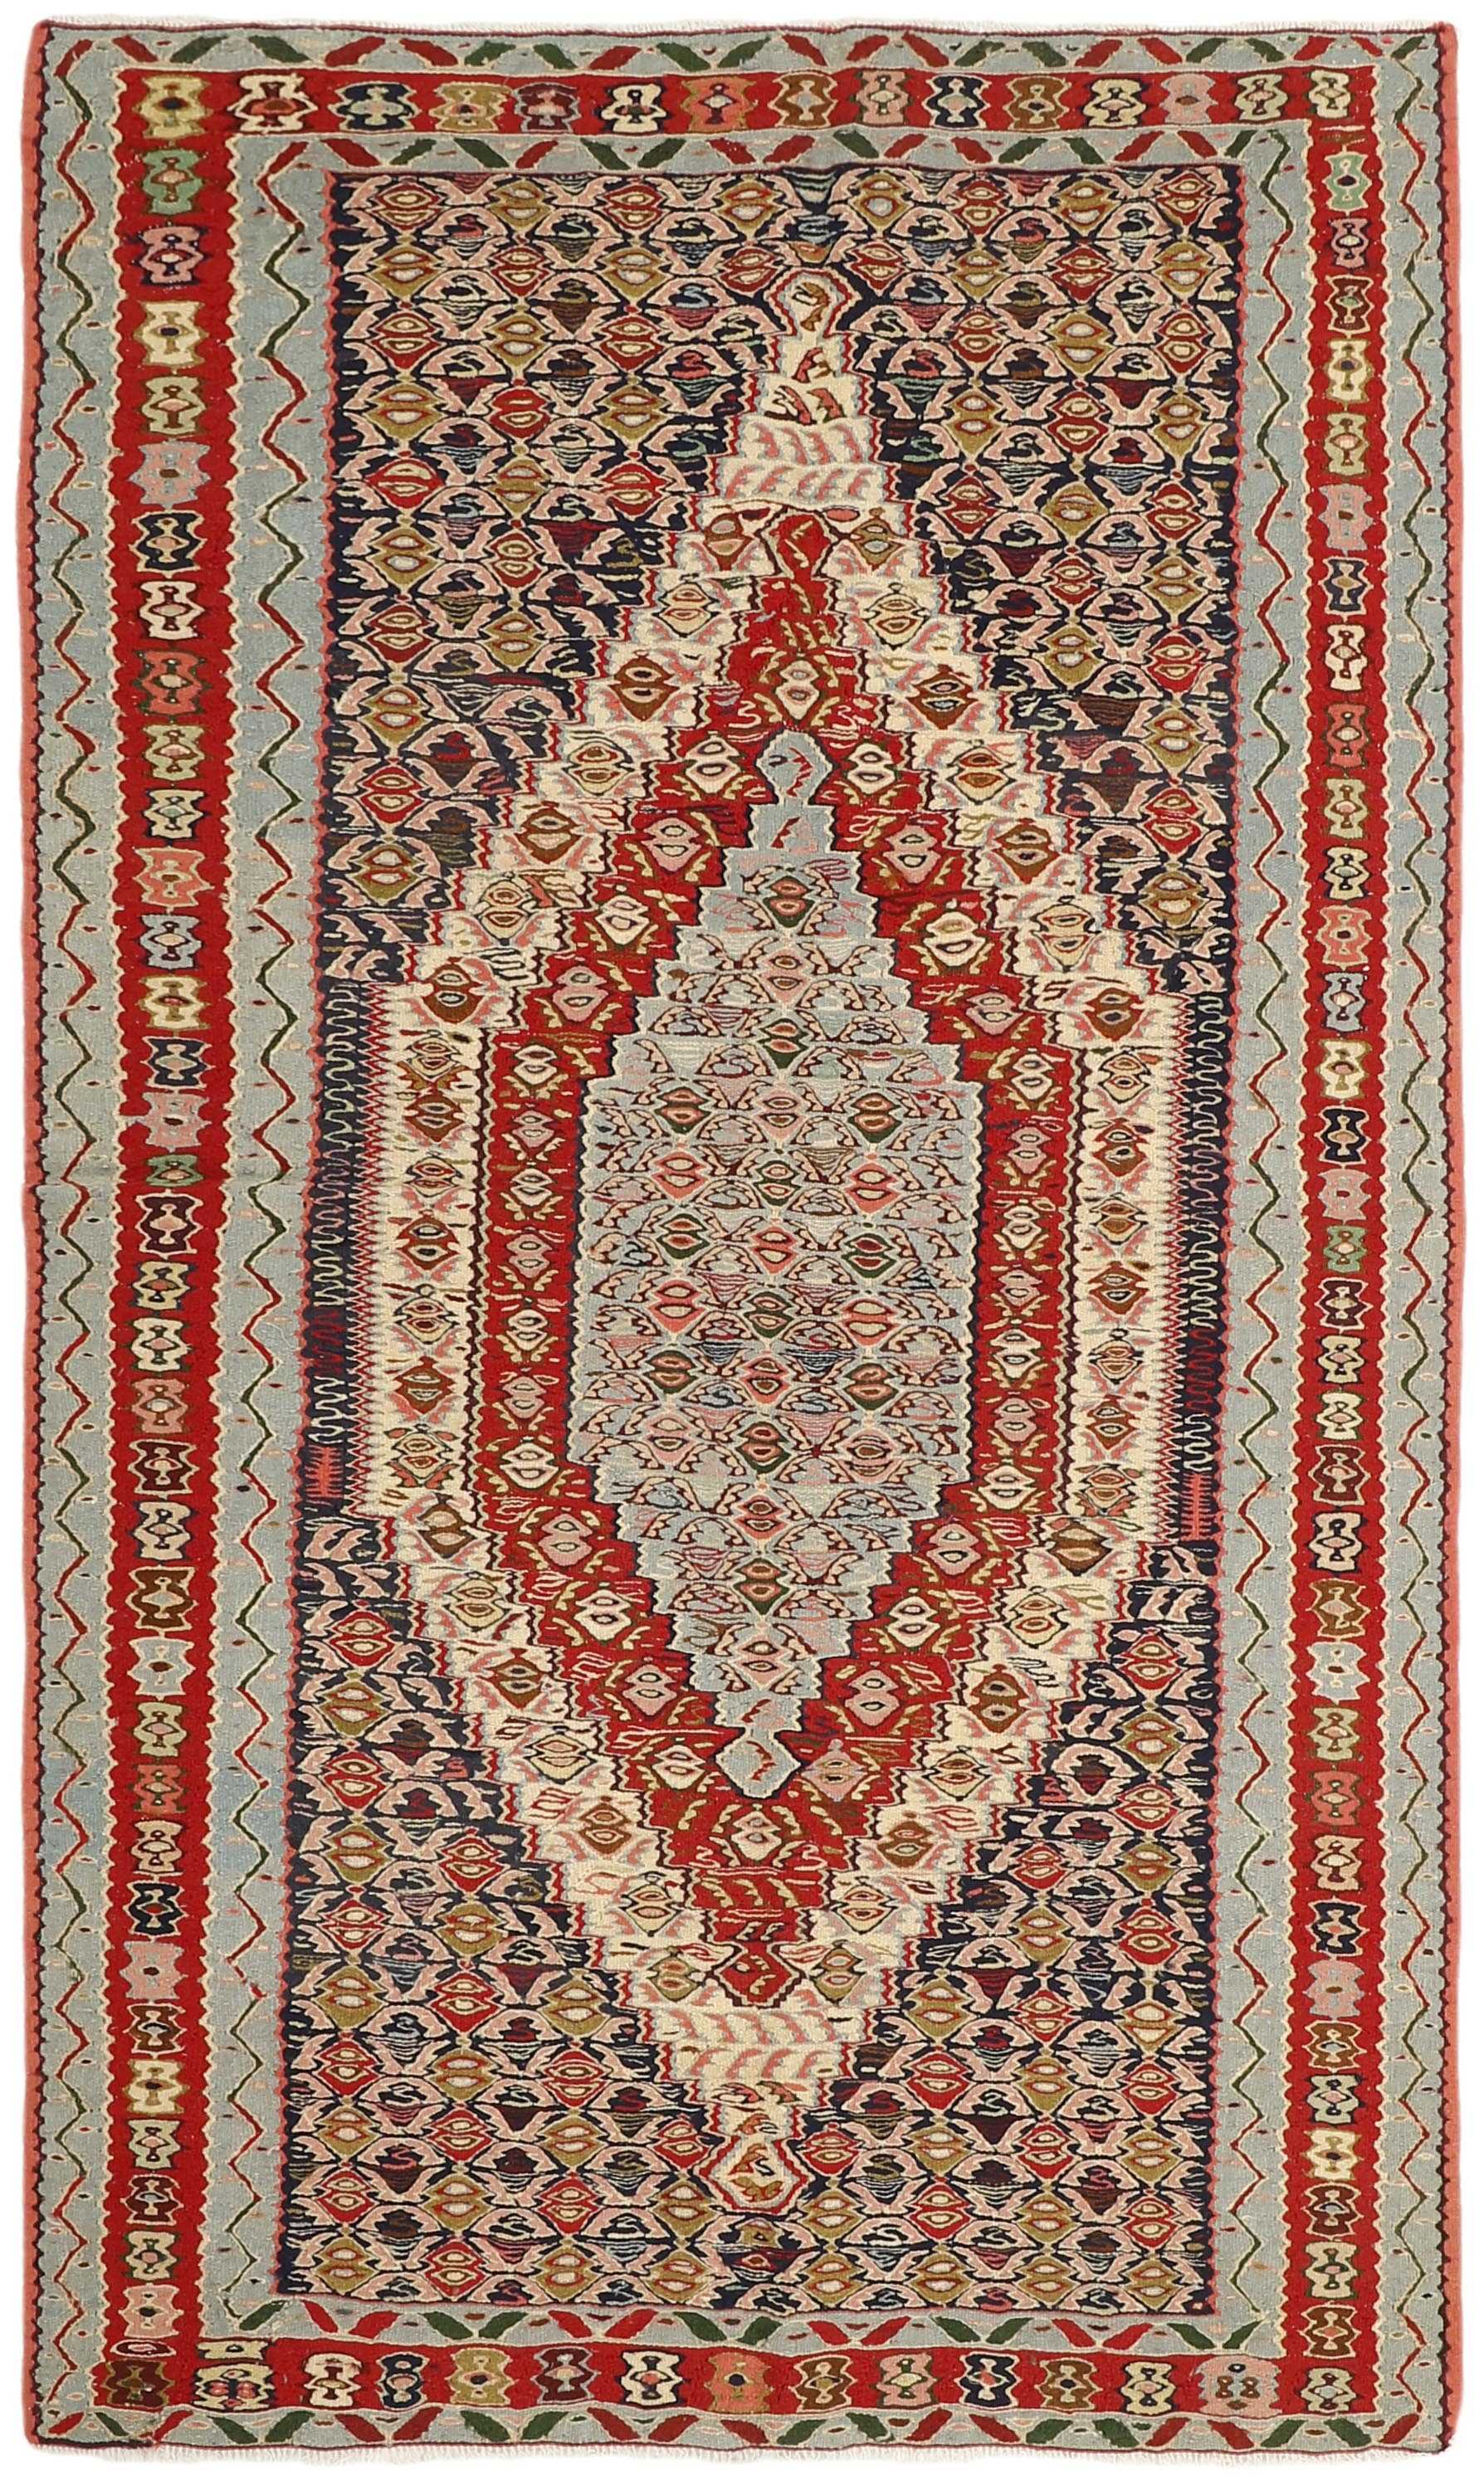 Authentic persian kelim flatweave rug with traditional geometric floral design in multicolour